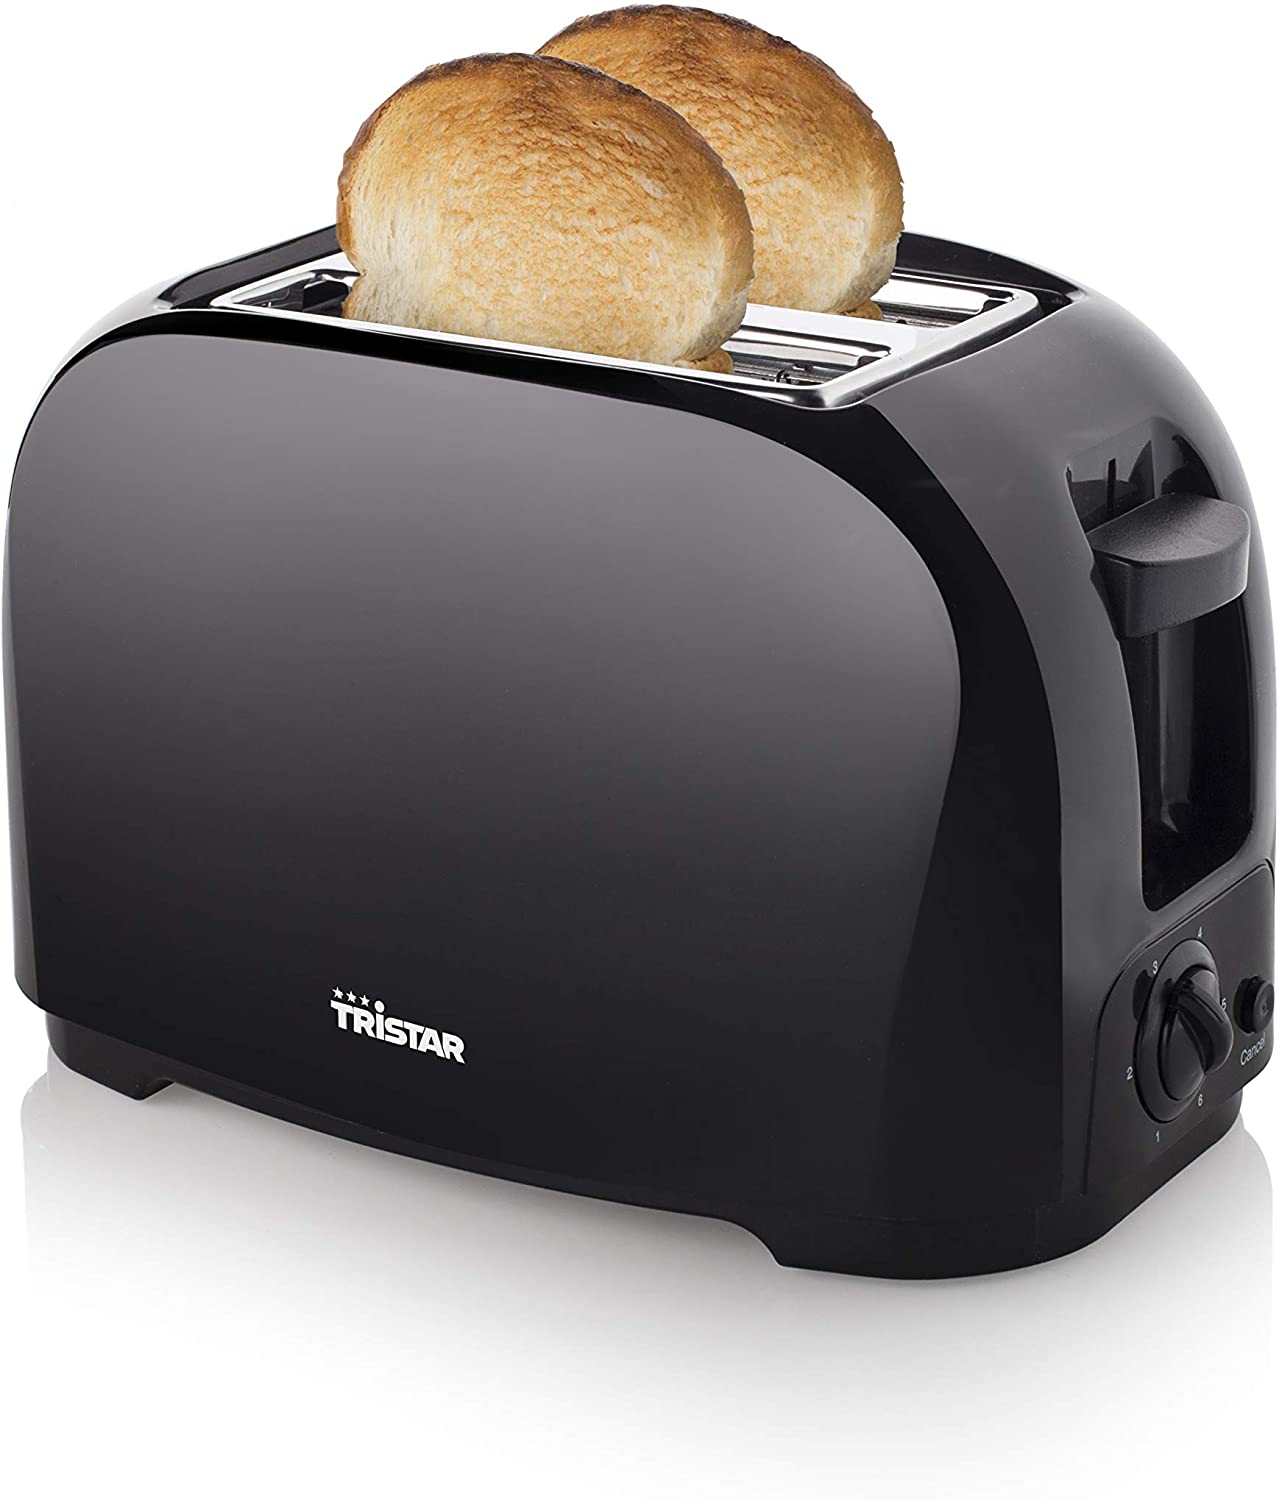 Tristar BR-1025 Toaster - 6 Adjustable Browning Levels with Bun Attachment - Removable Crumb Compartment